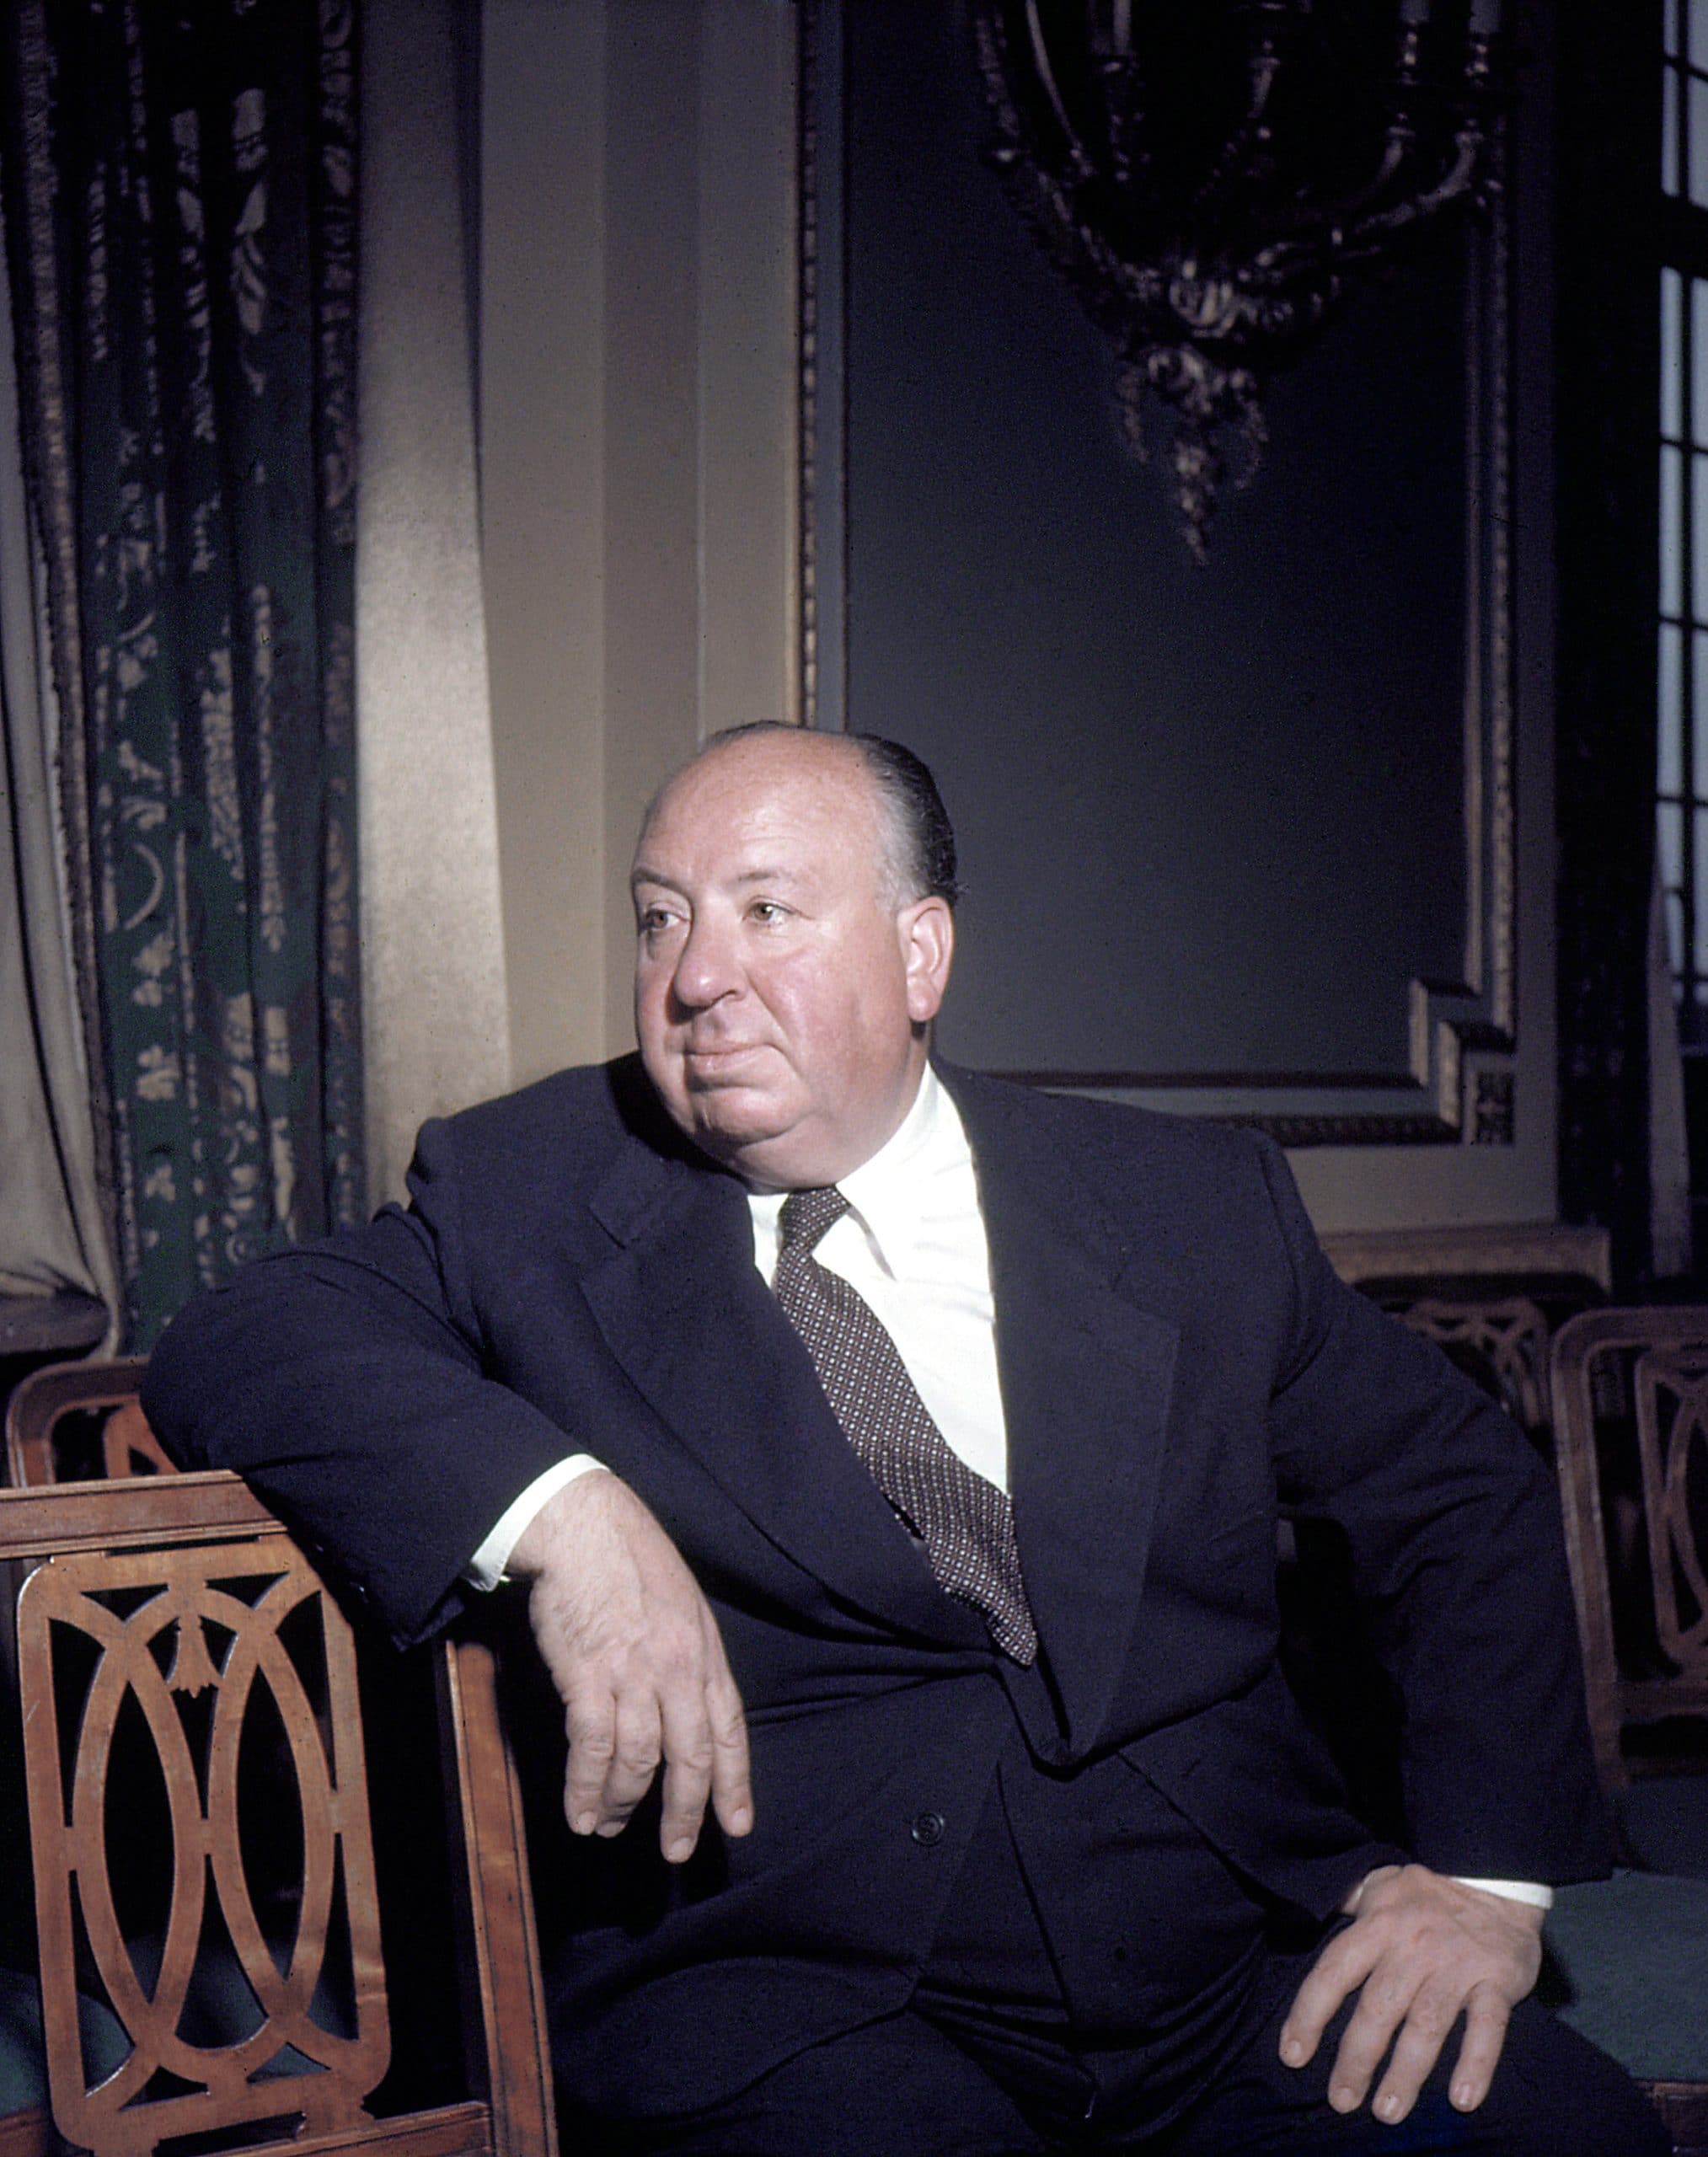 Alfred Hitchcock, director, late 1940s